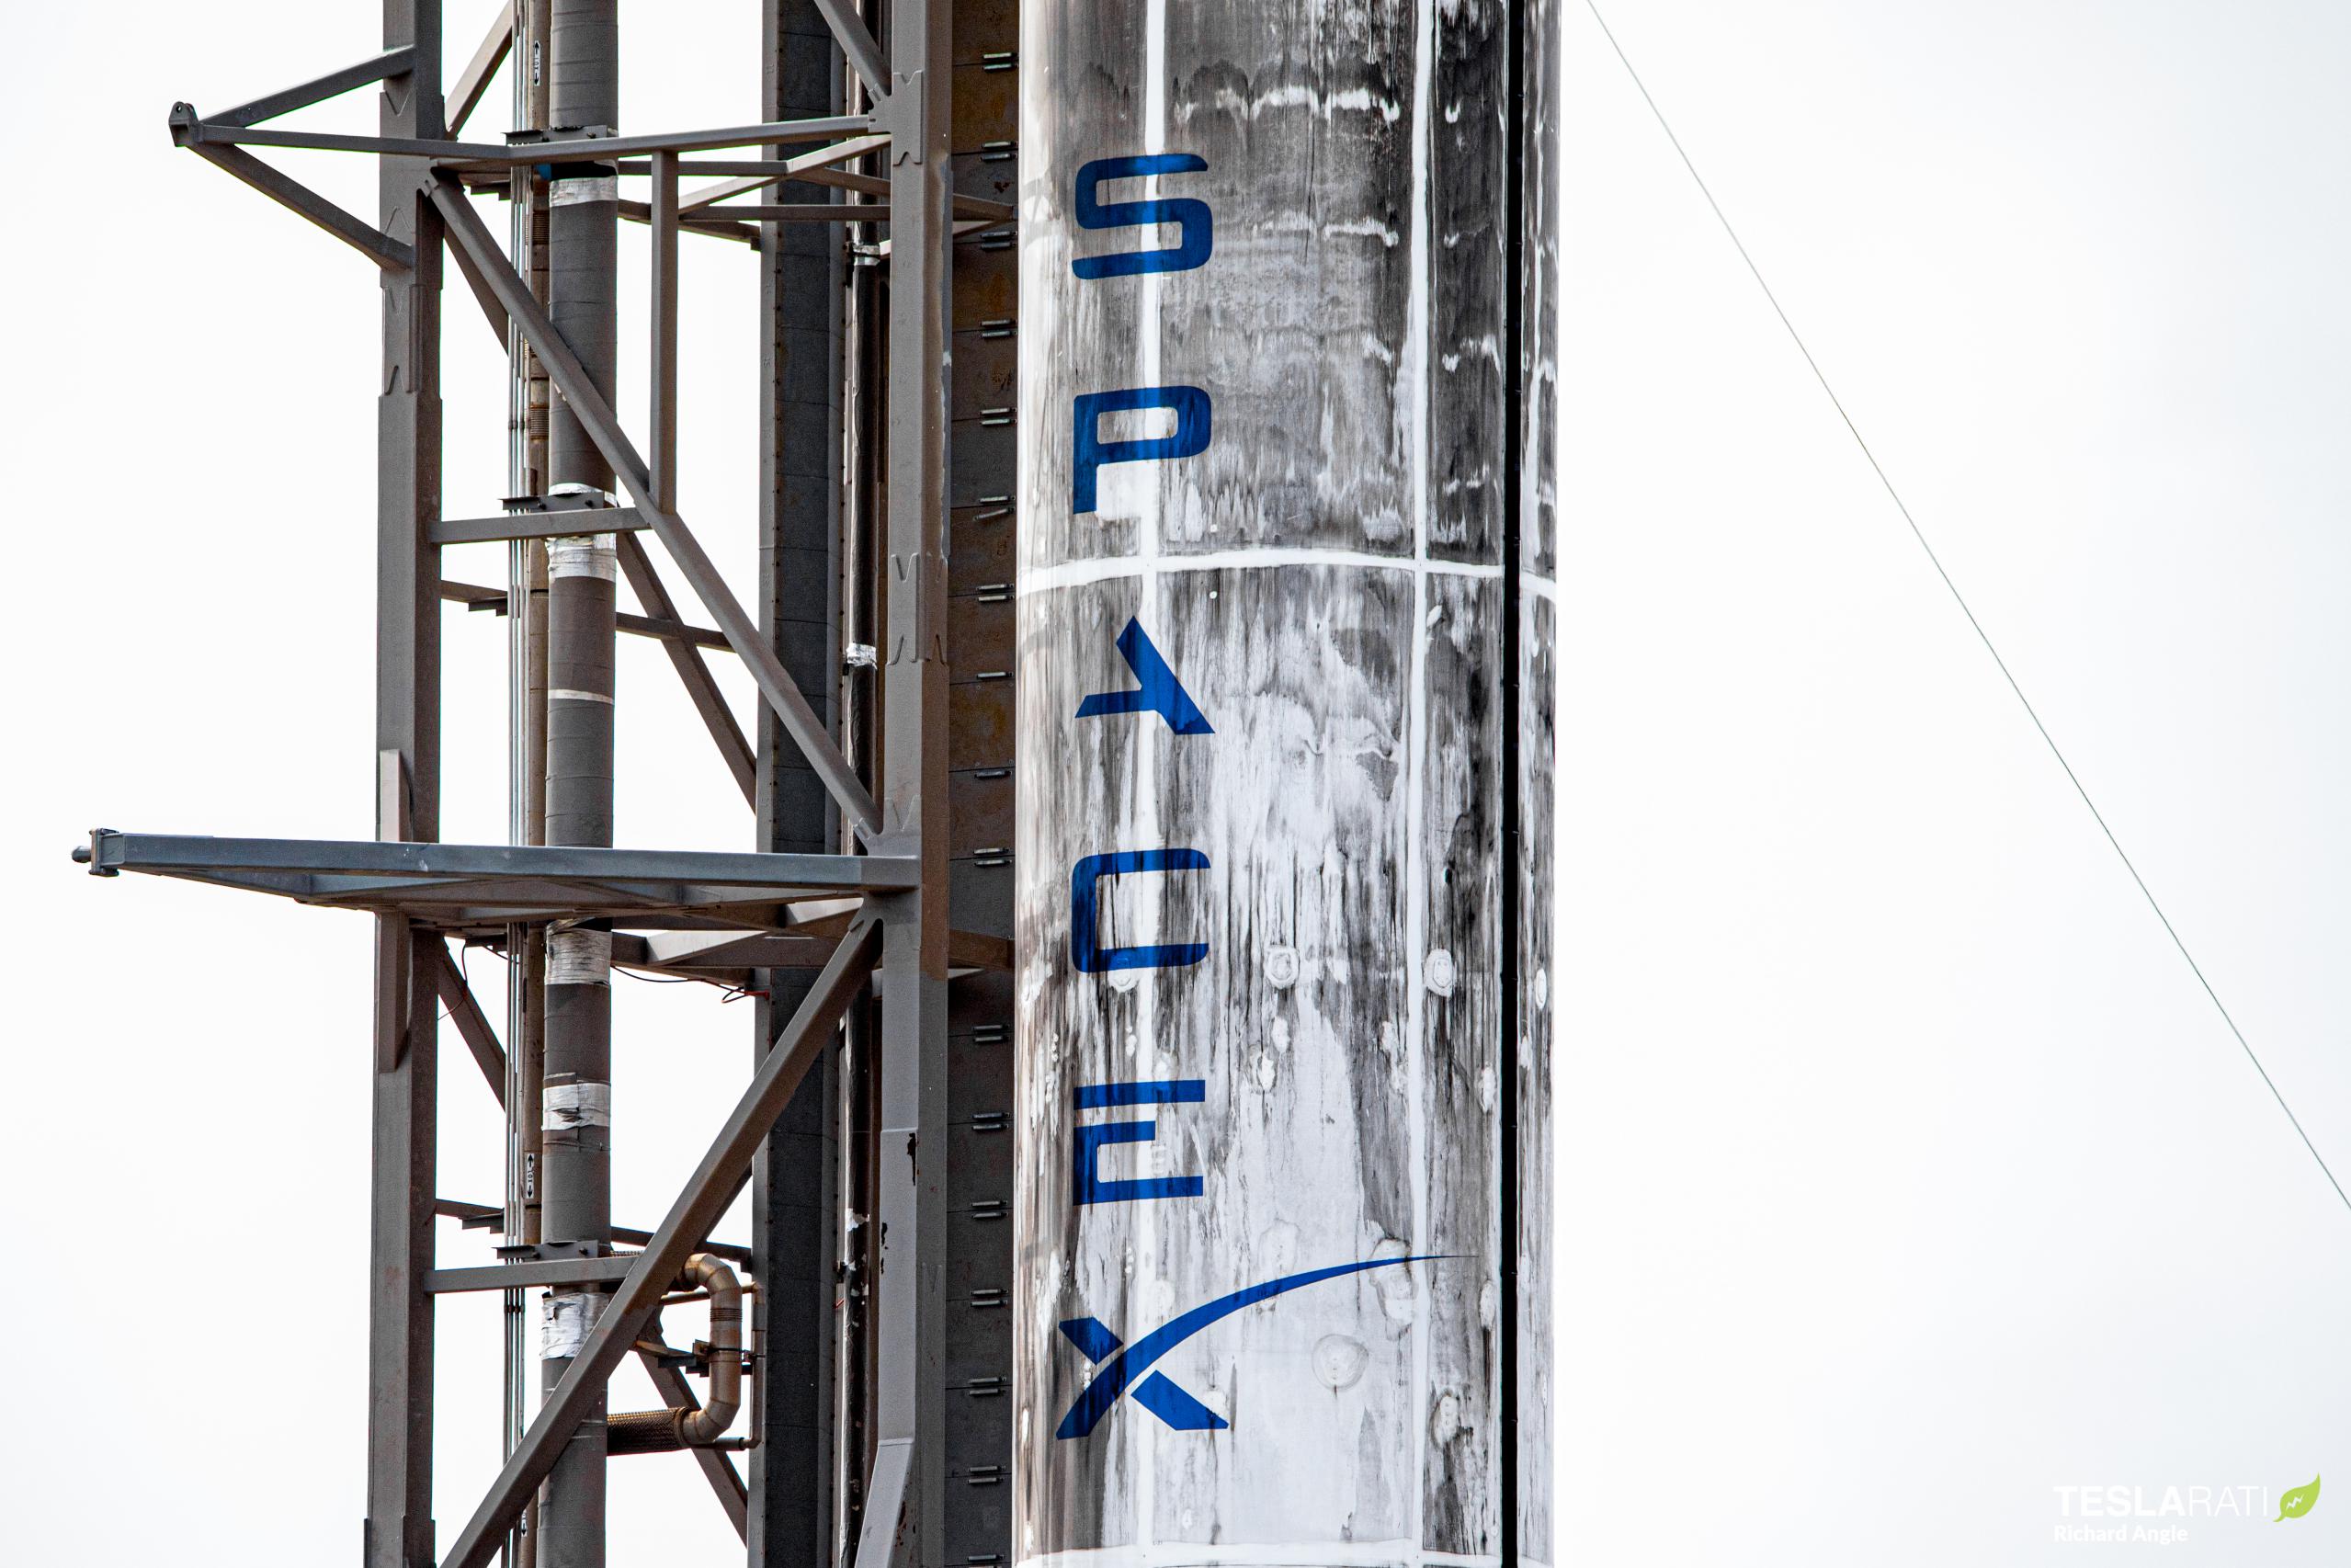 SpaceX already raising Falcon 9 rocket vertical for next Starlink launch